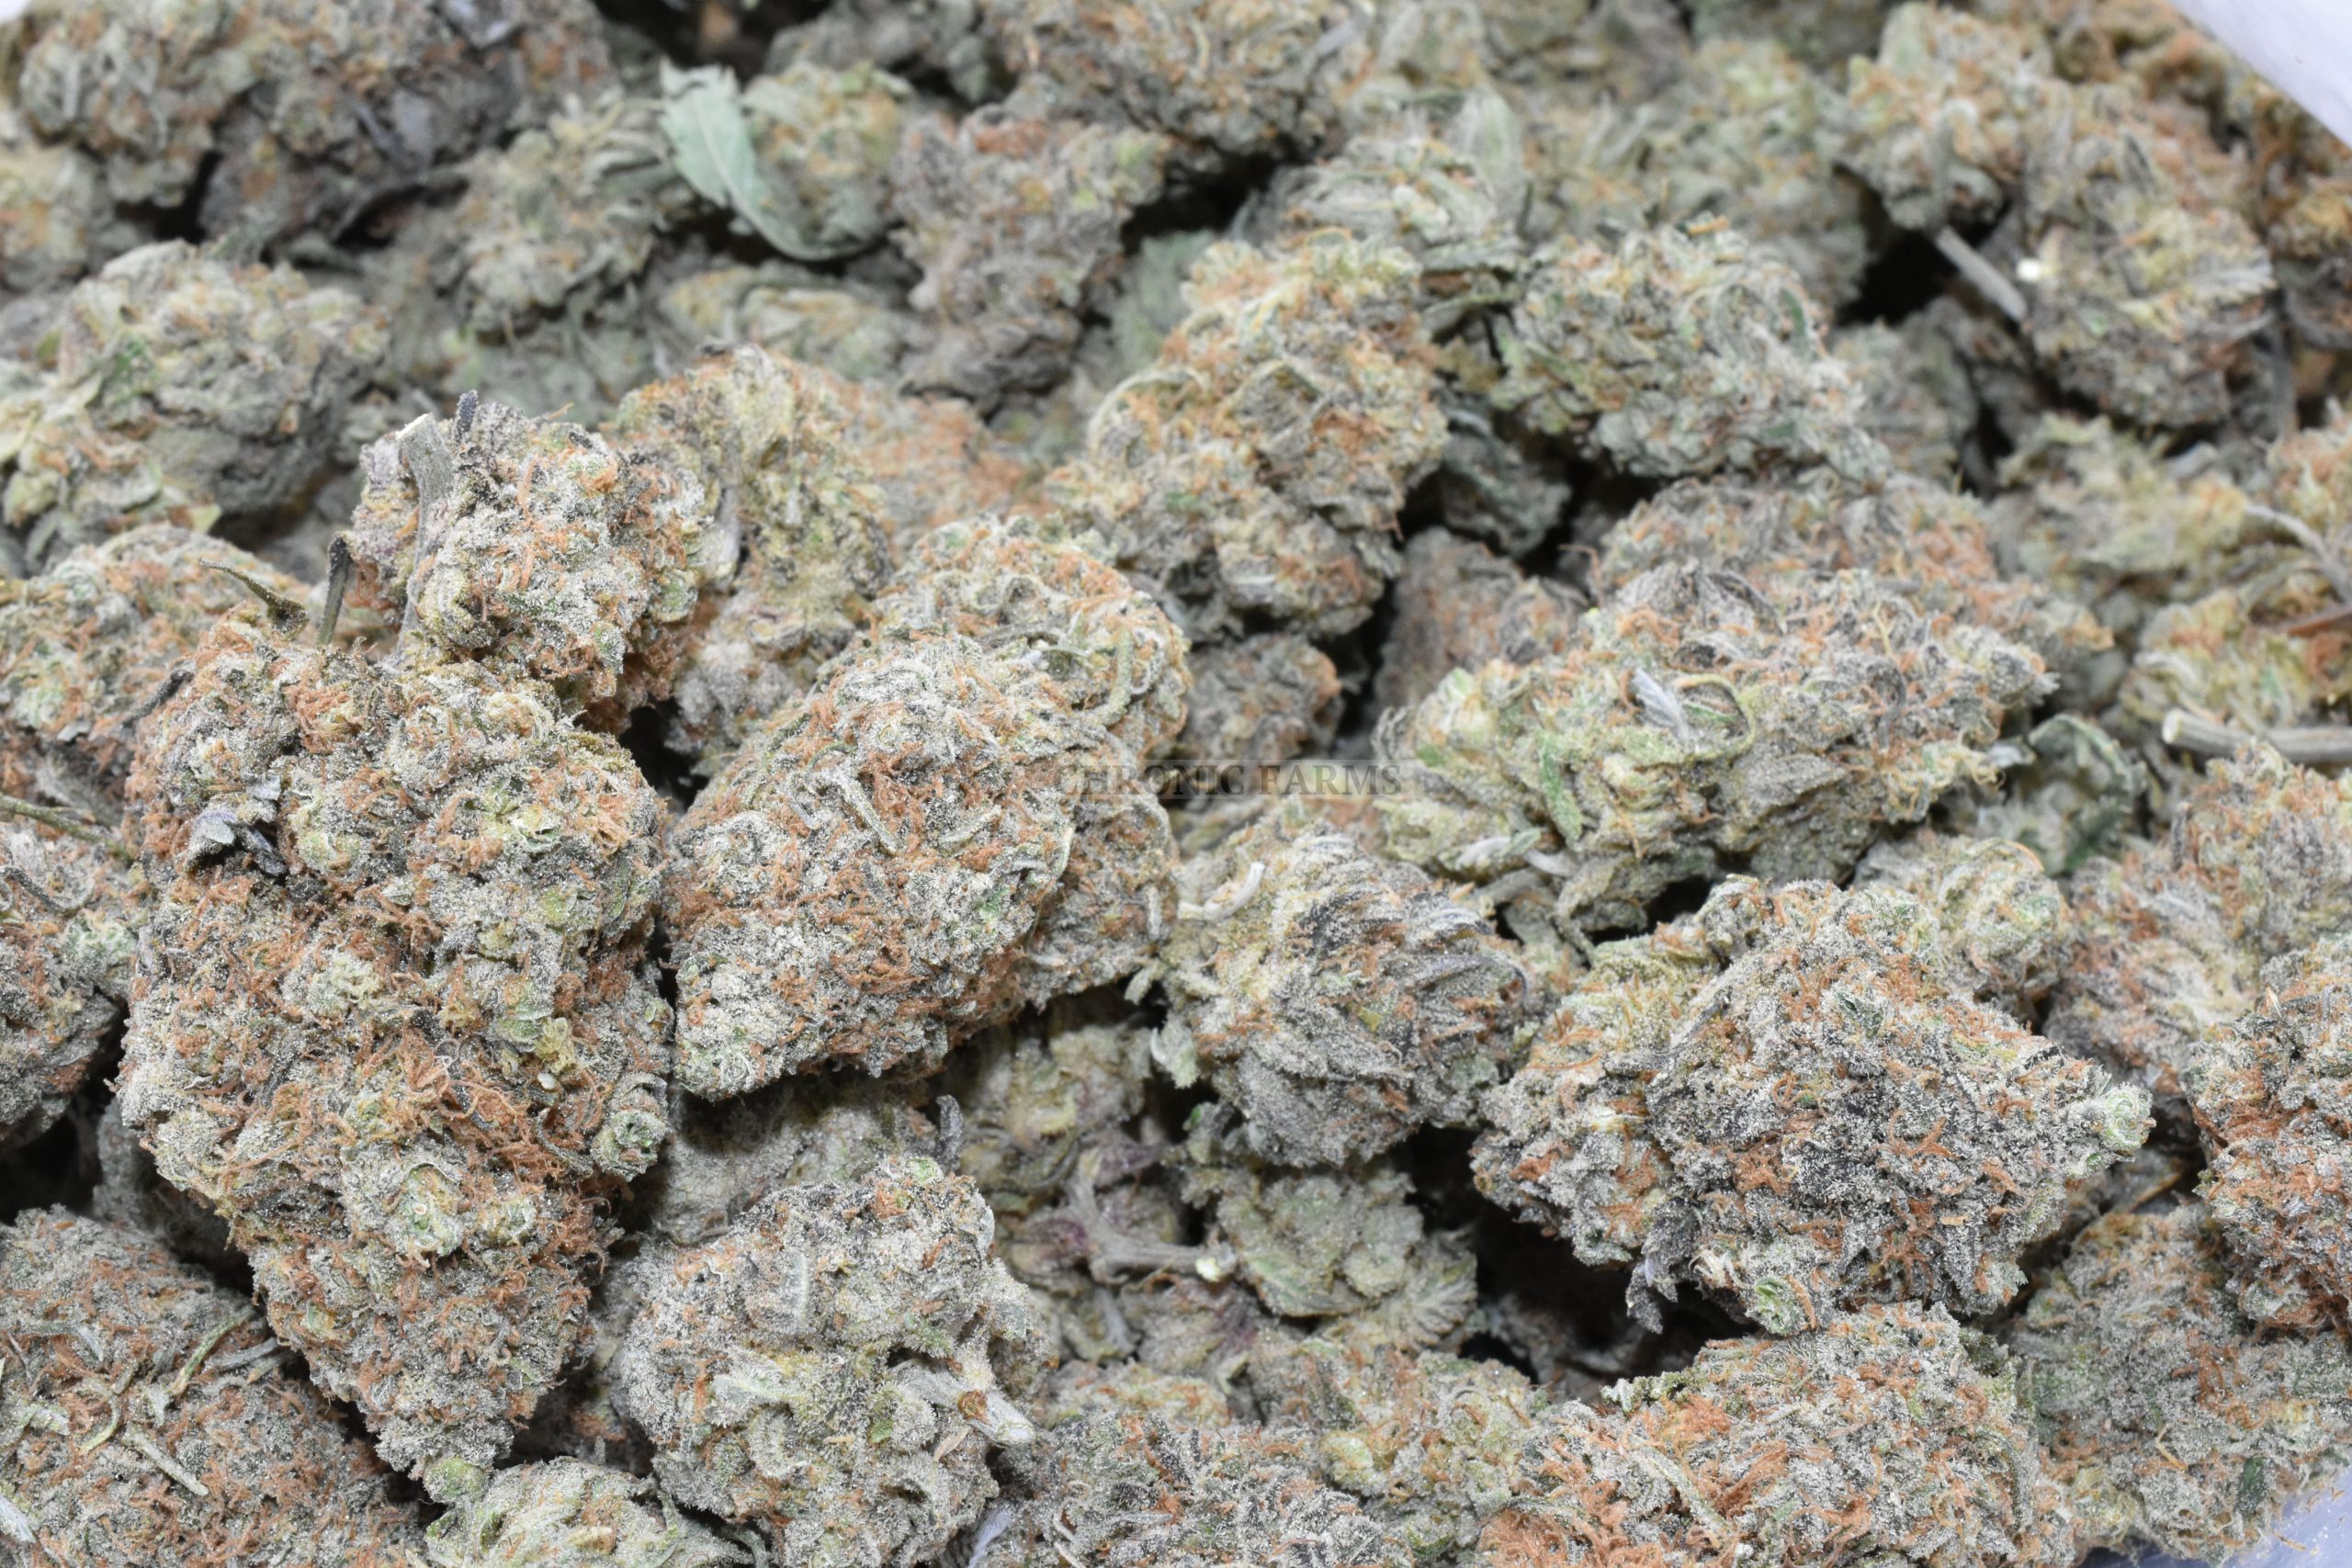 buy-white-castle-at-chronicfarms.cc-online-weed-dispensary